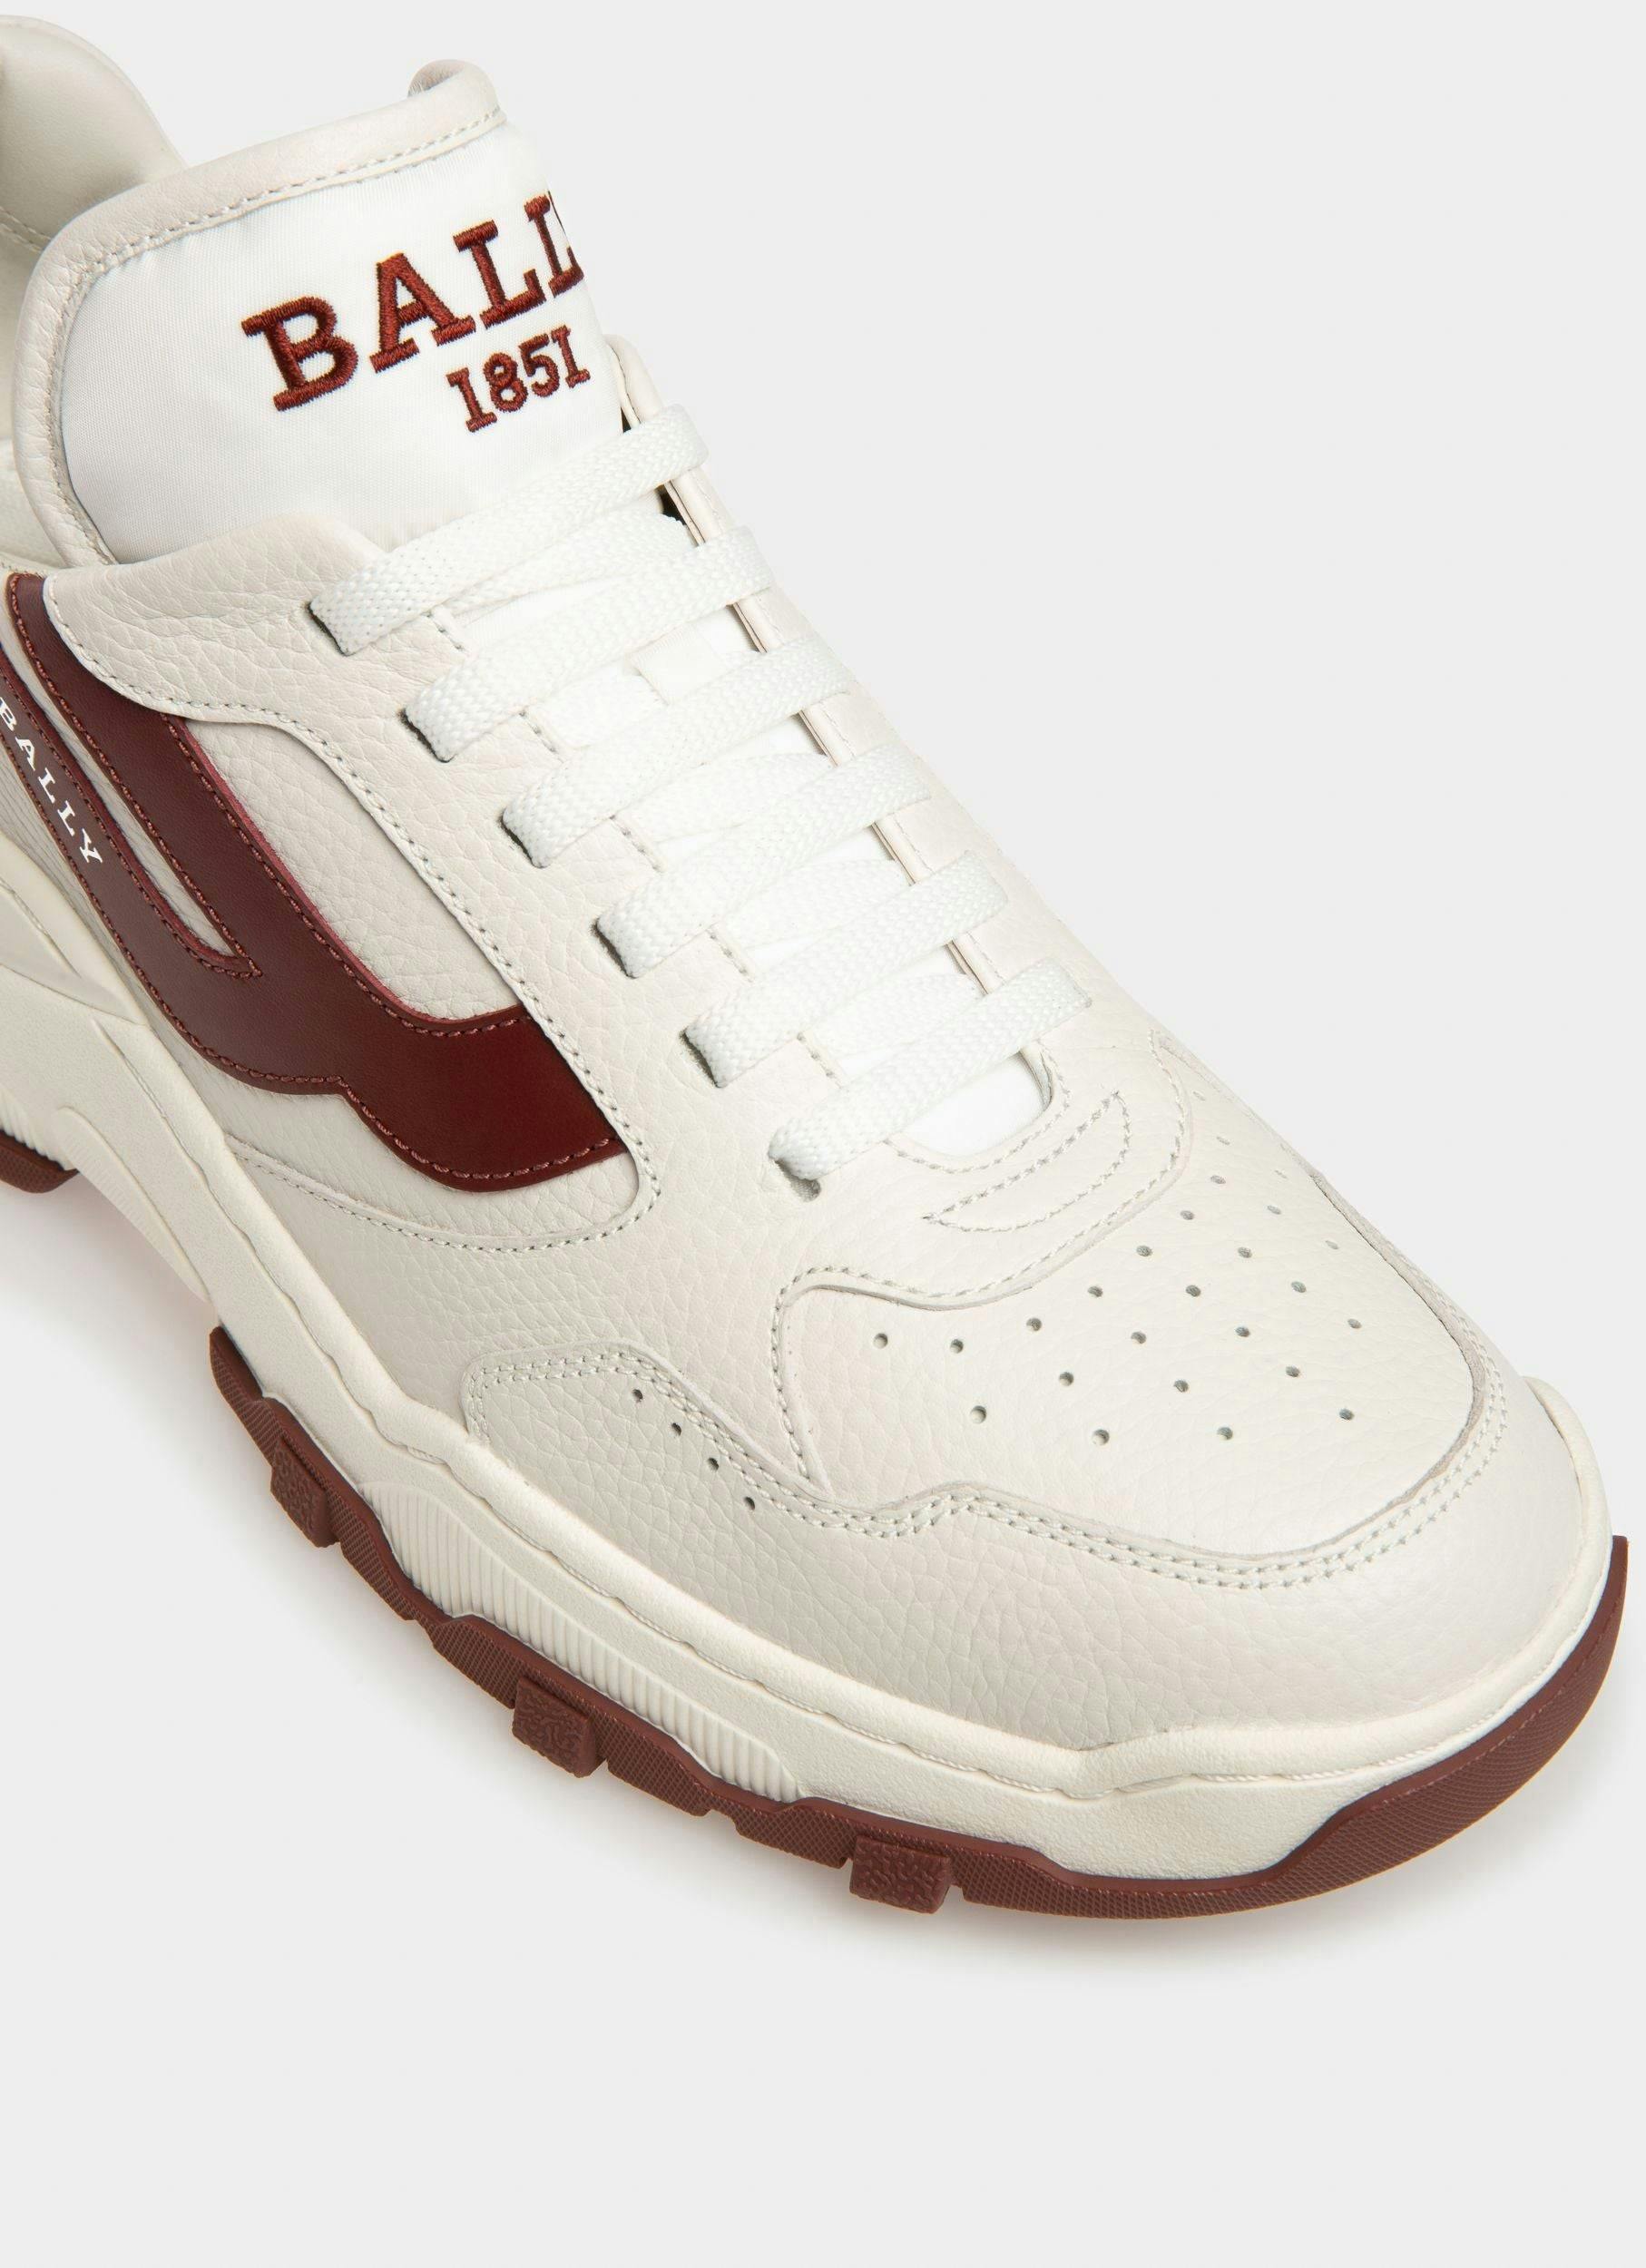 Holden Leather And Fabric Sneakers In White And Heritage Red - Men's - Bally - 06